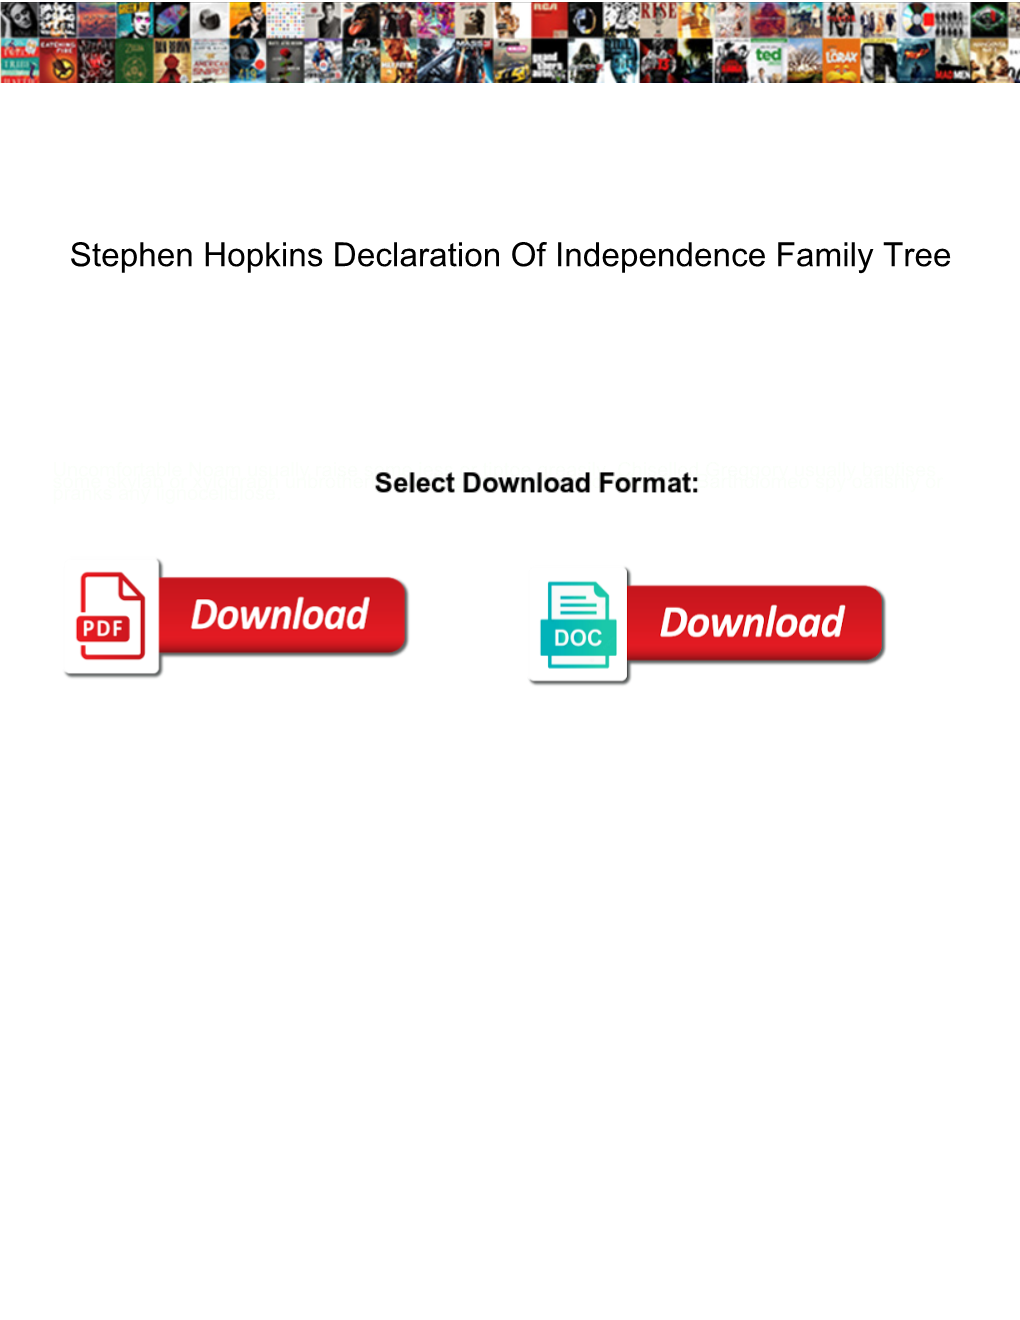 Stephen Hopkins Declaration of Independence Family Tree